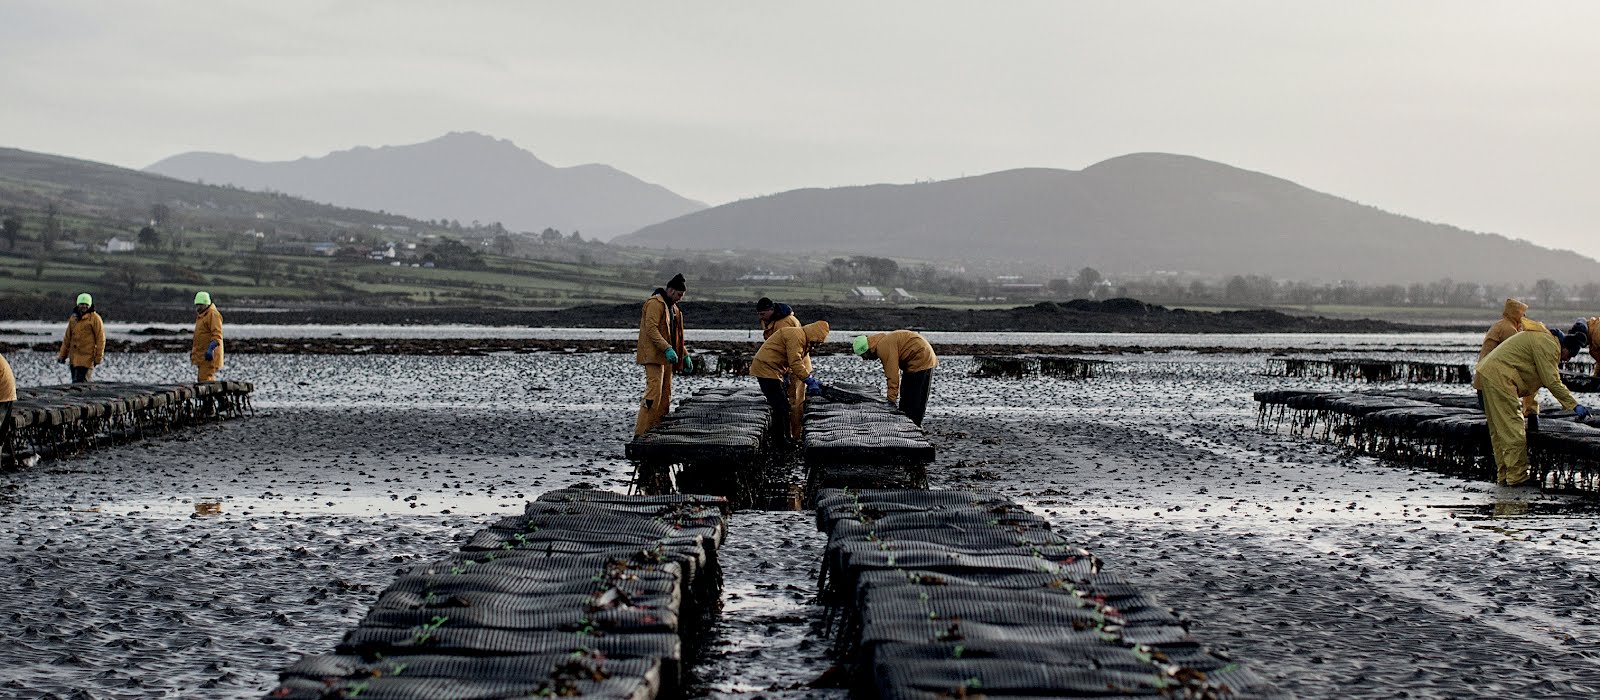 Why are Irish oysters so special? We visit Carlingford Lough to find out